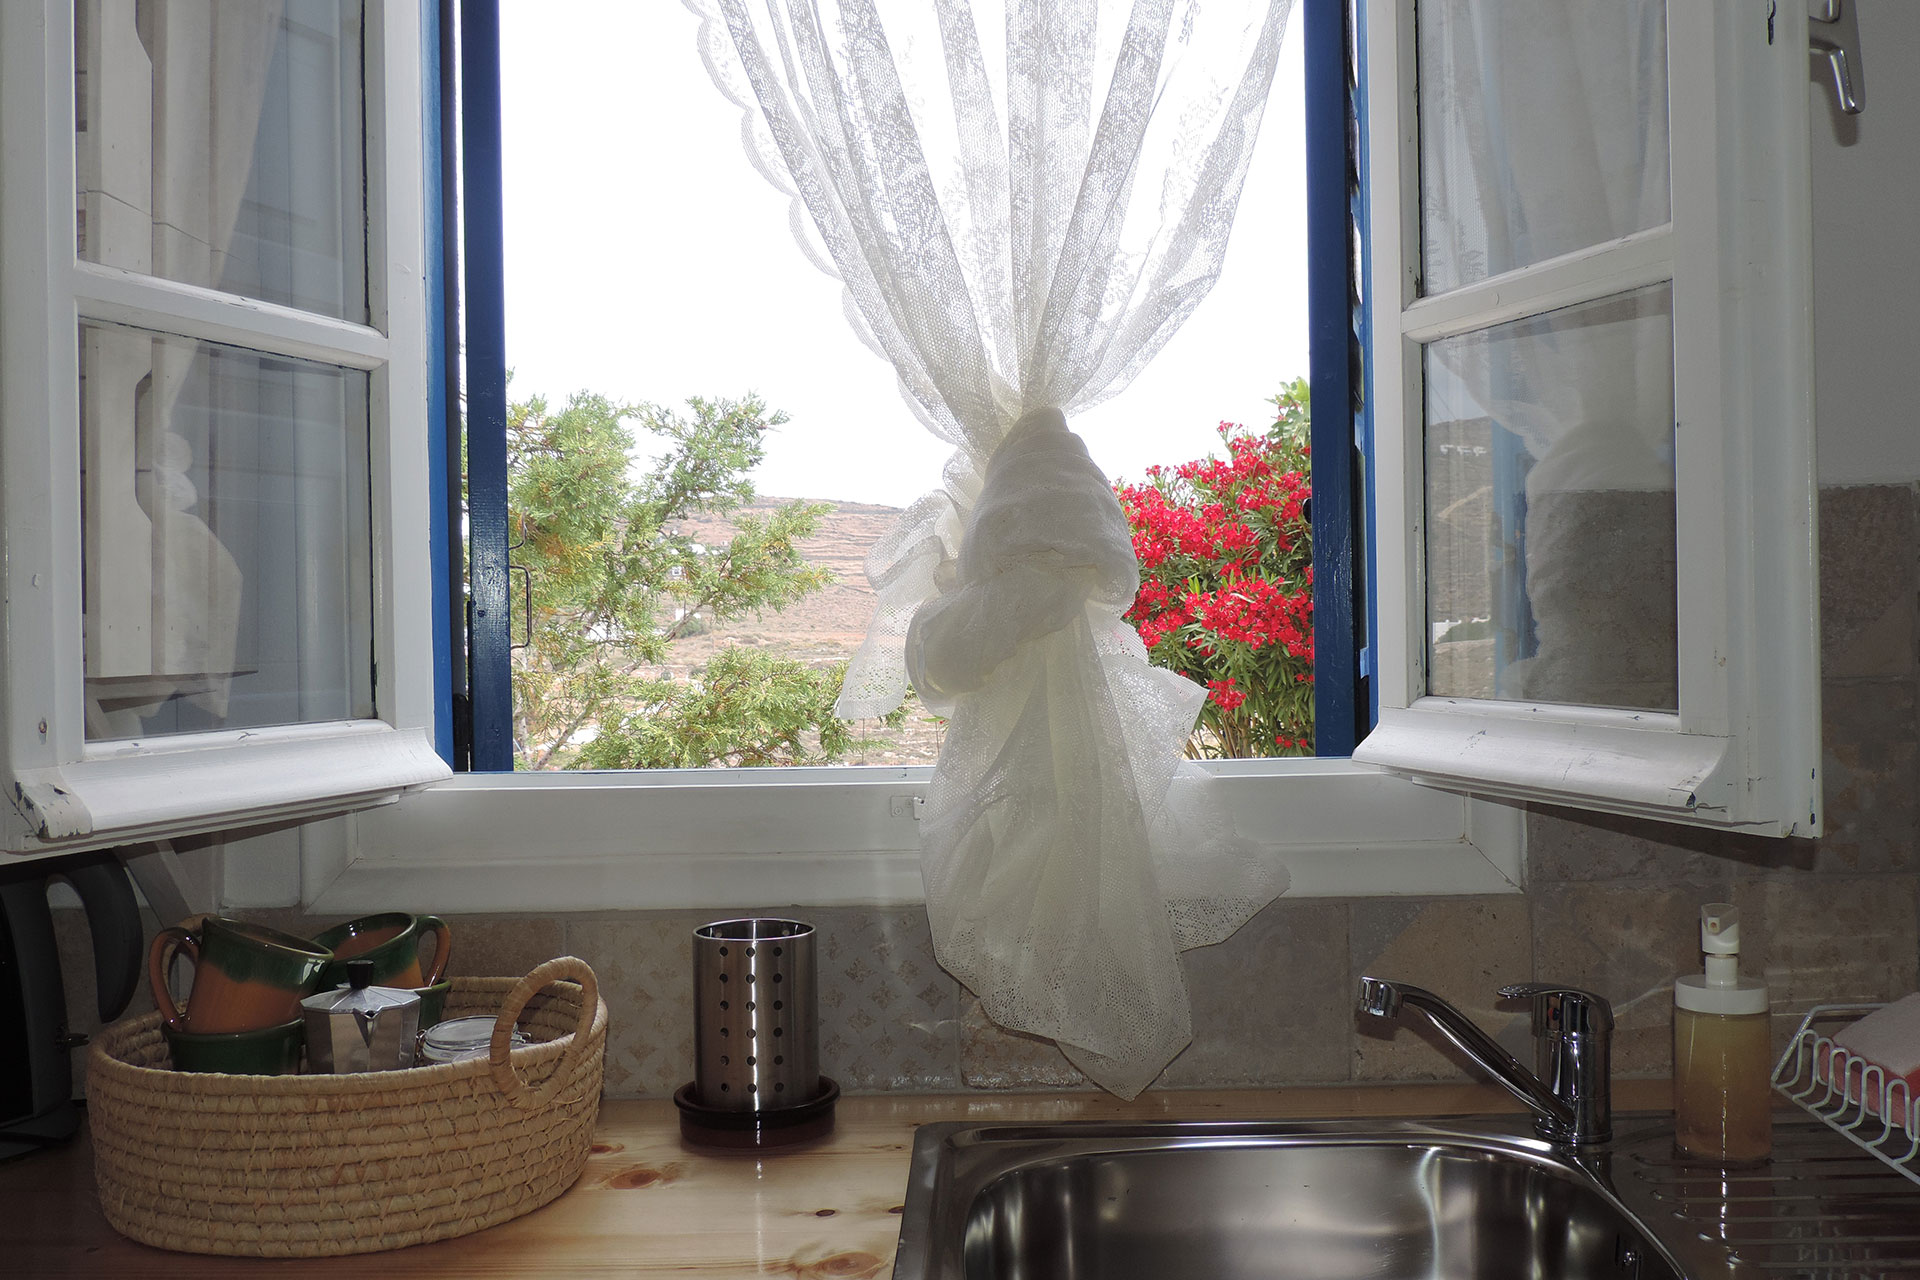 The kitchen of Louisa family studio at Sifnos